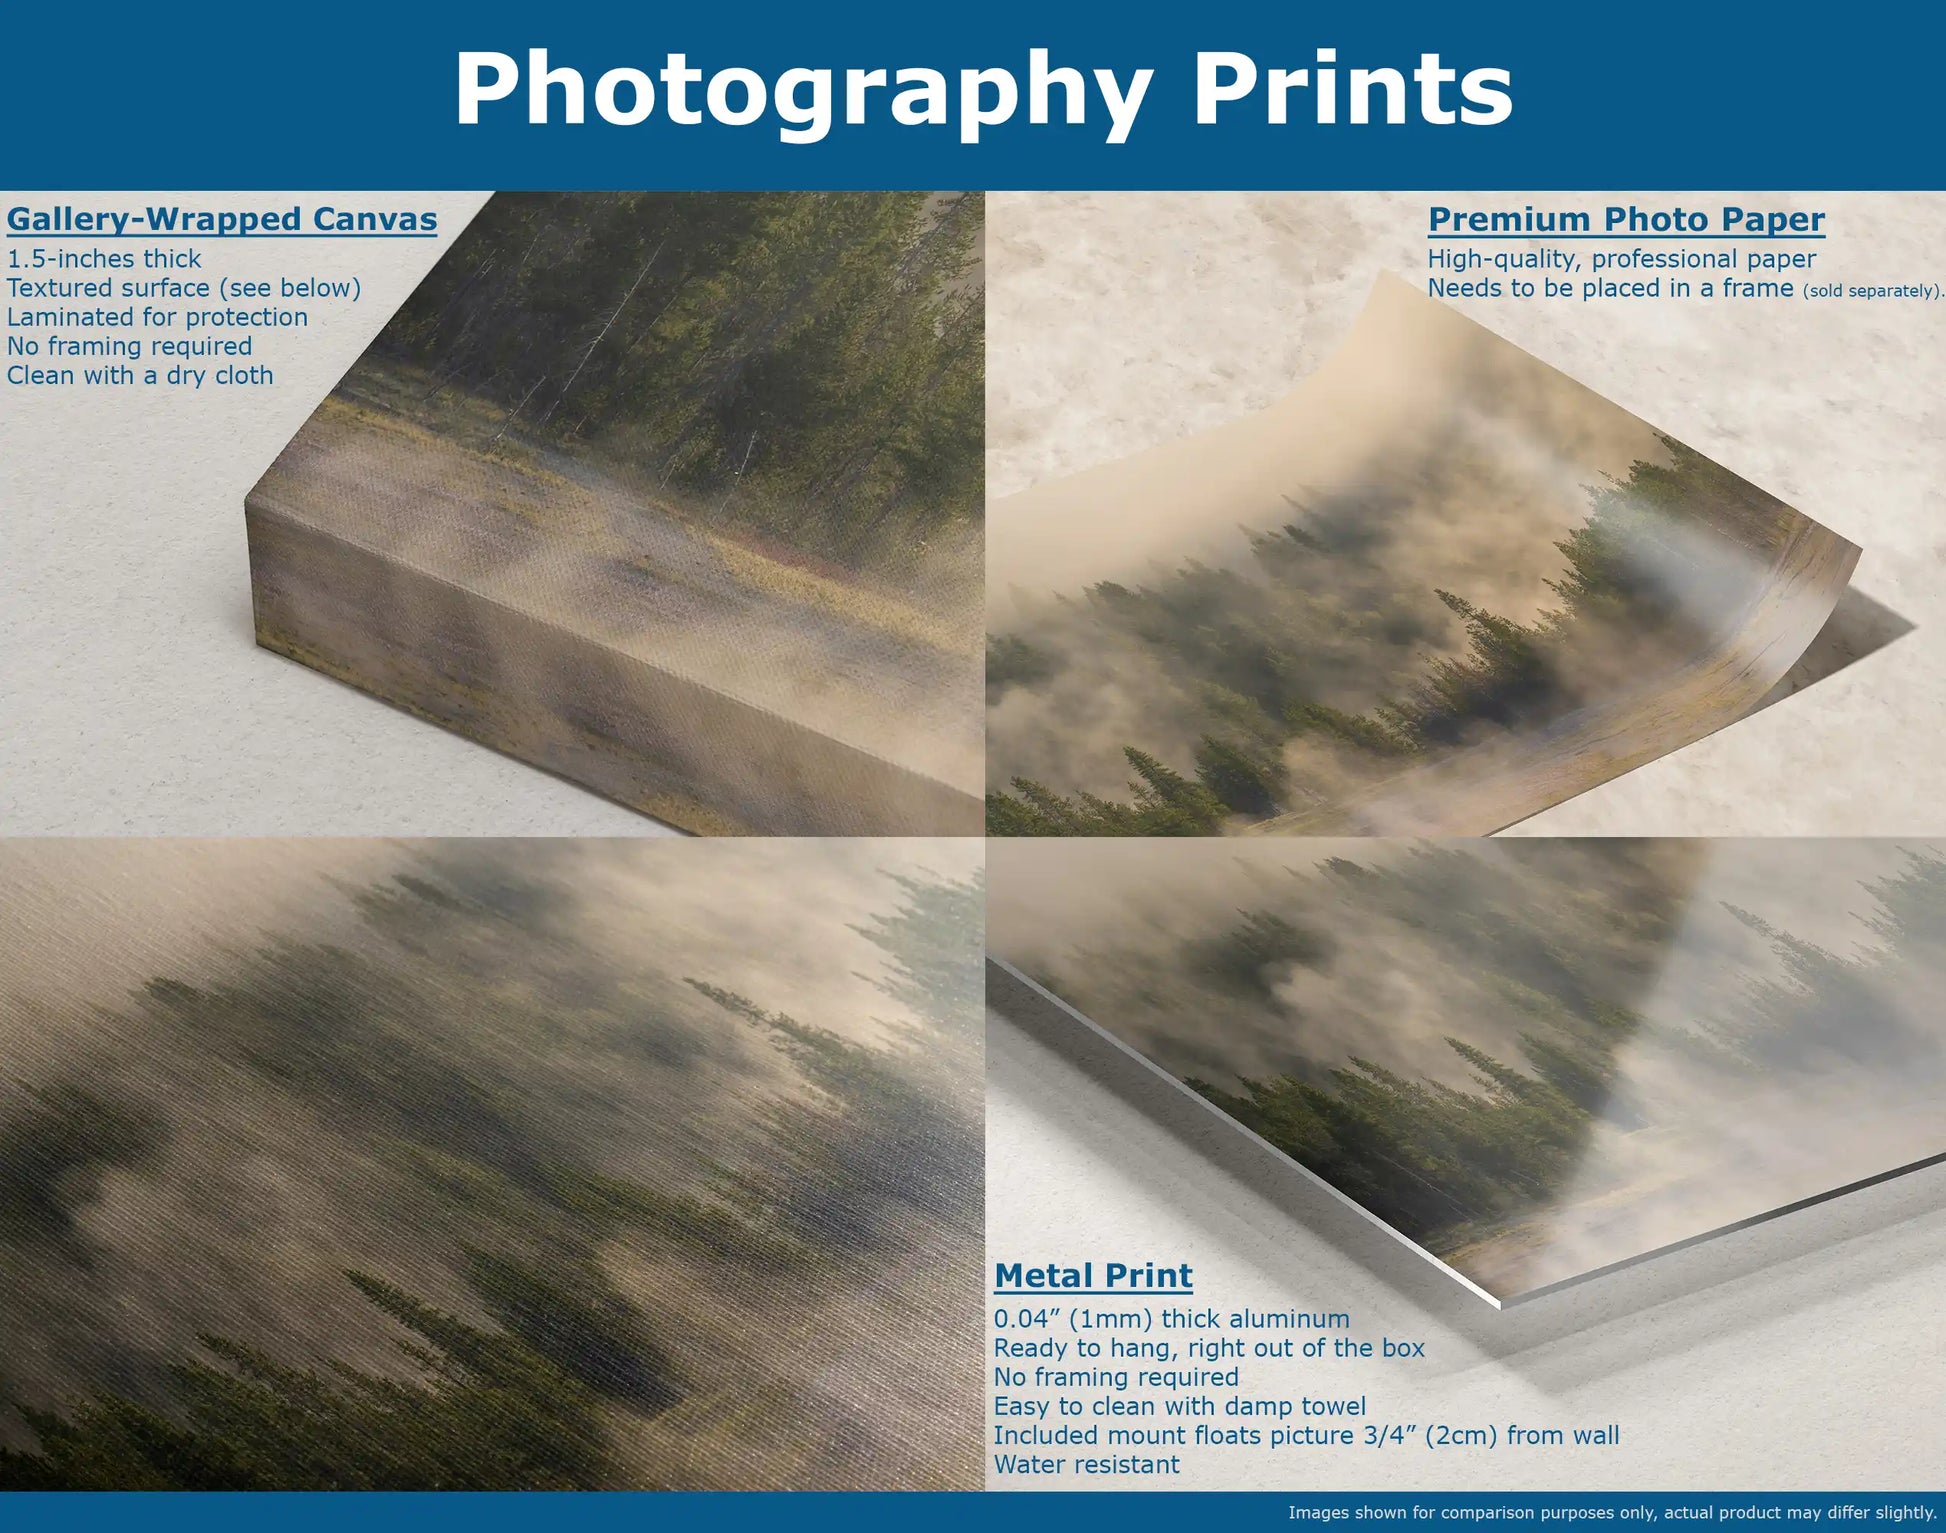 An explainer image comparing gallery-wrapped canvas, premium photo paper, and metal print mediums of a photograph of a forest of misty trees.